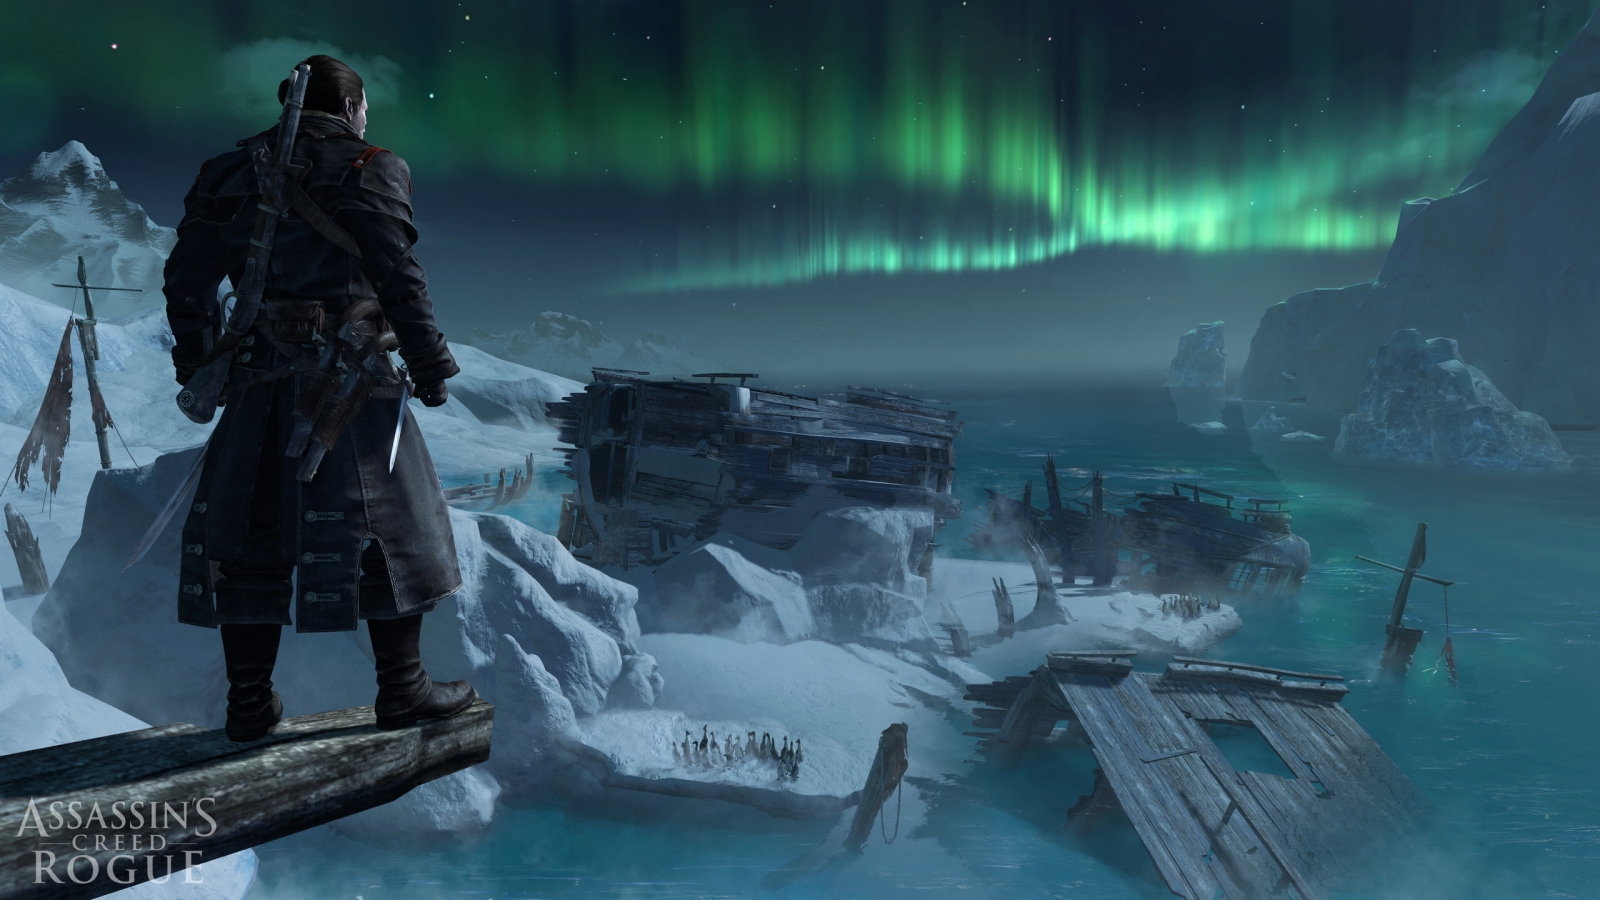 Assassins Creed Rogue Game for 1600 x 900 HDTV resolution